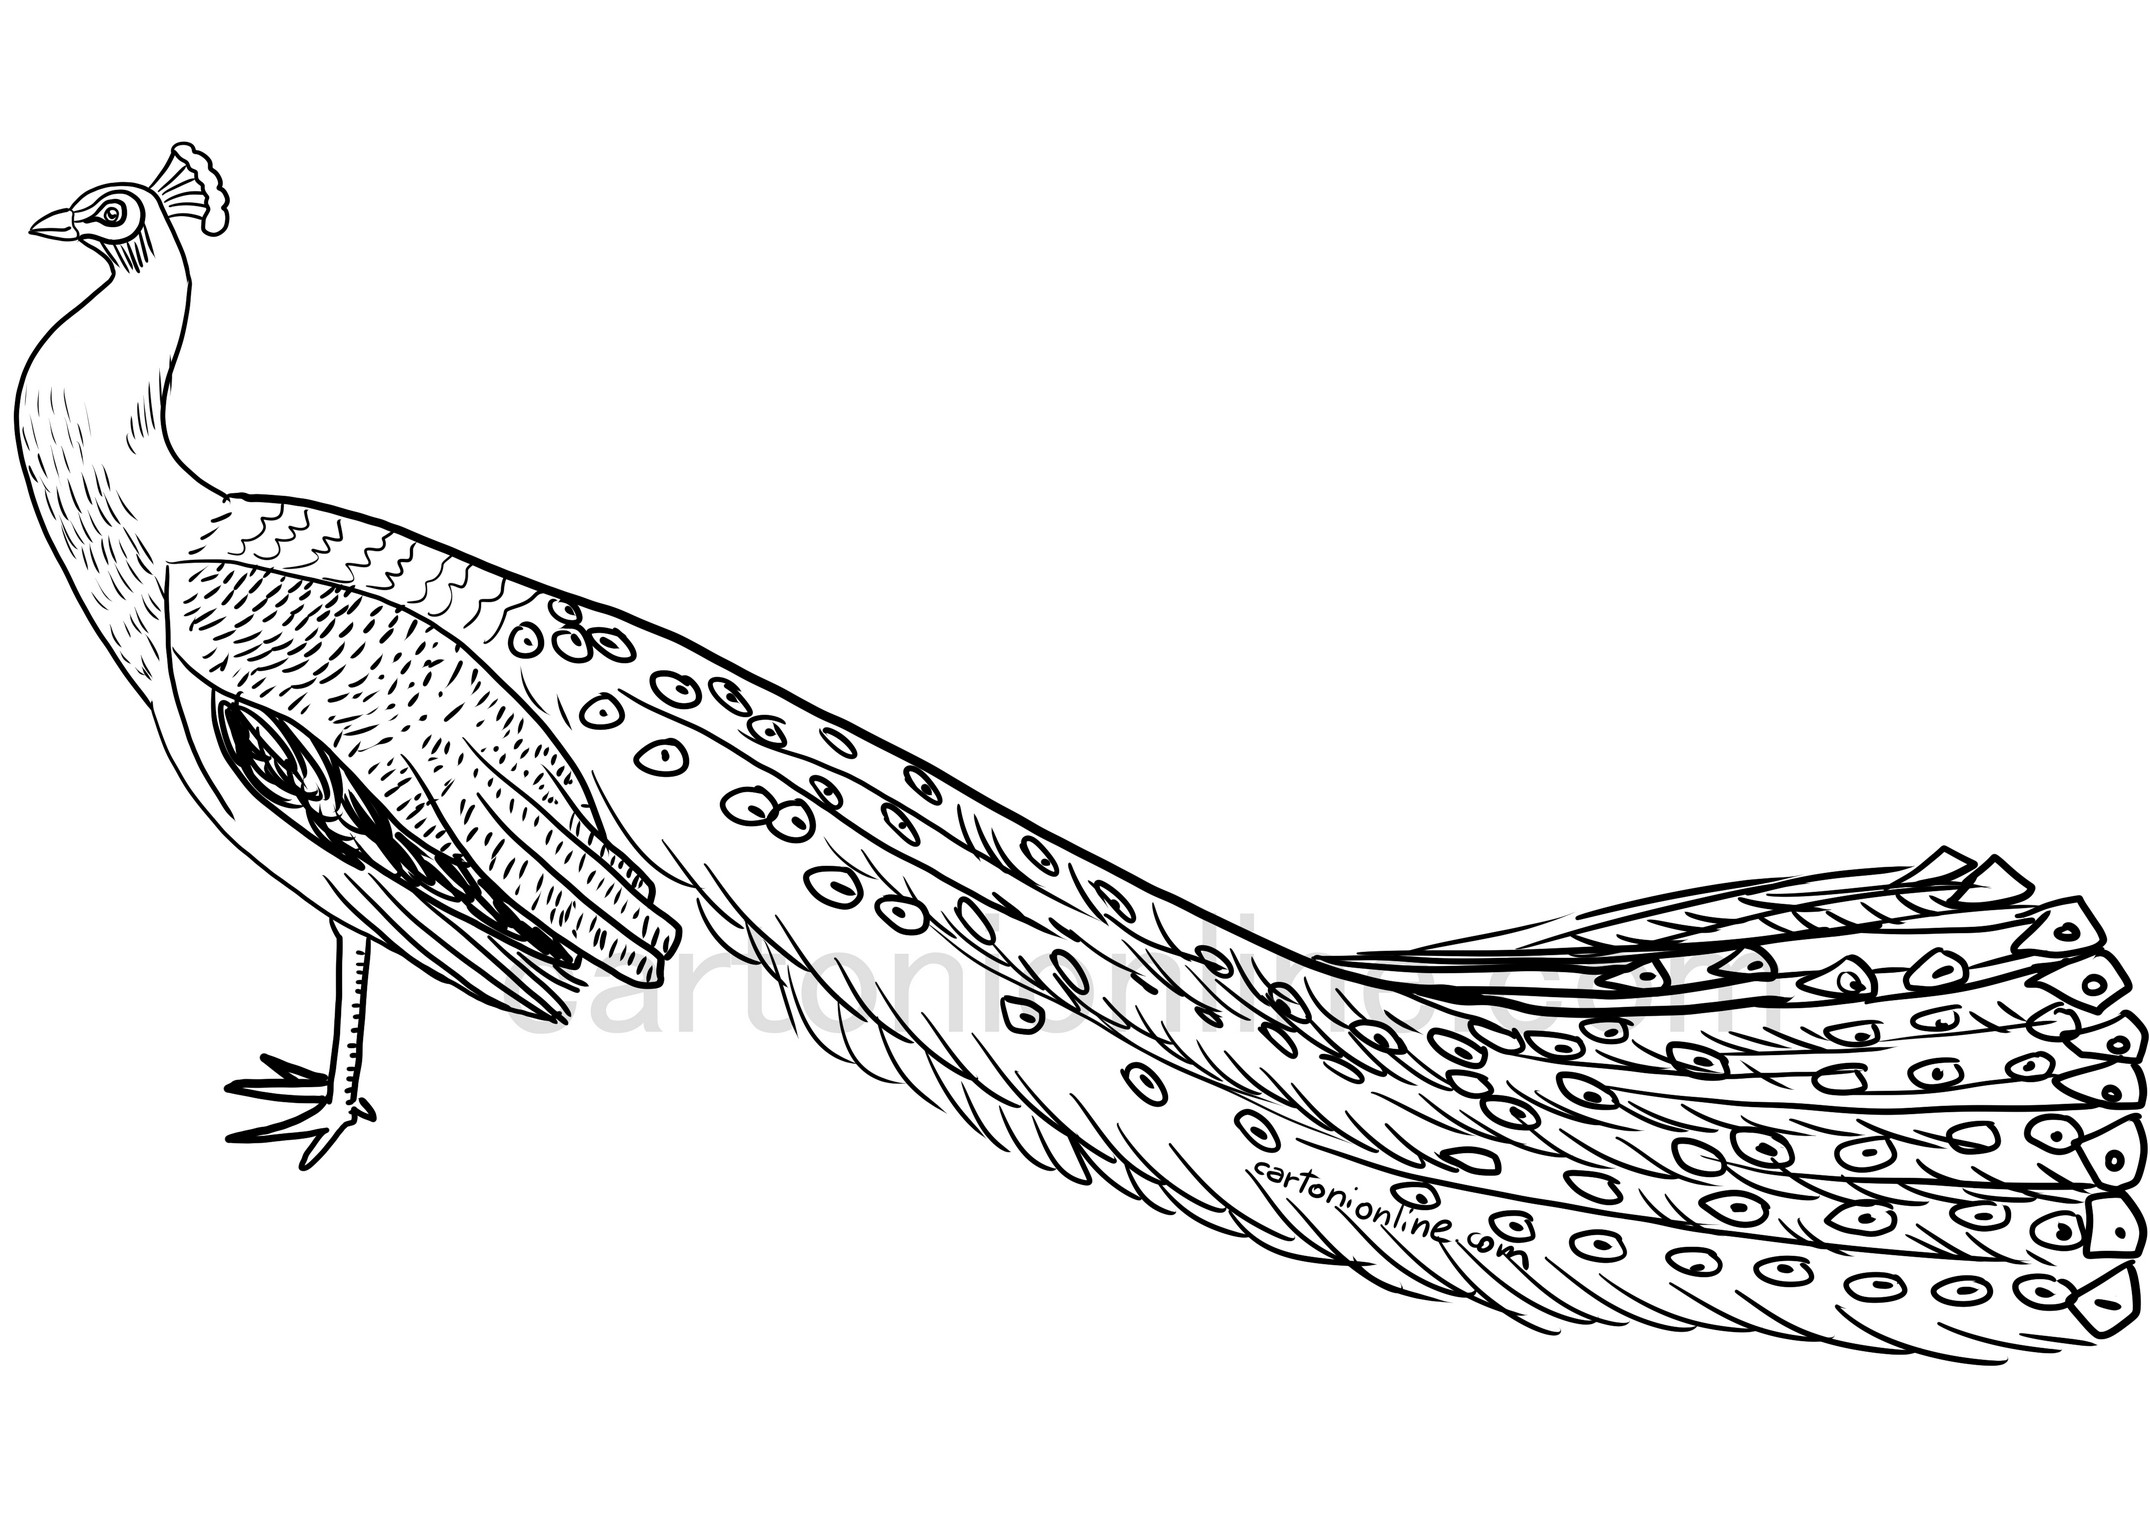 Realistic Peacock coloring page